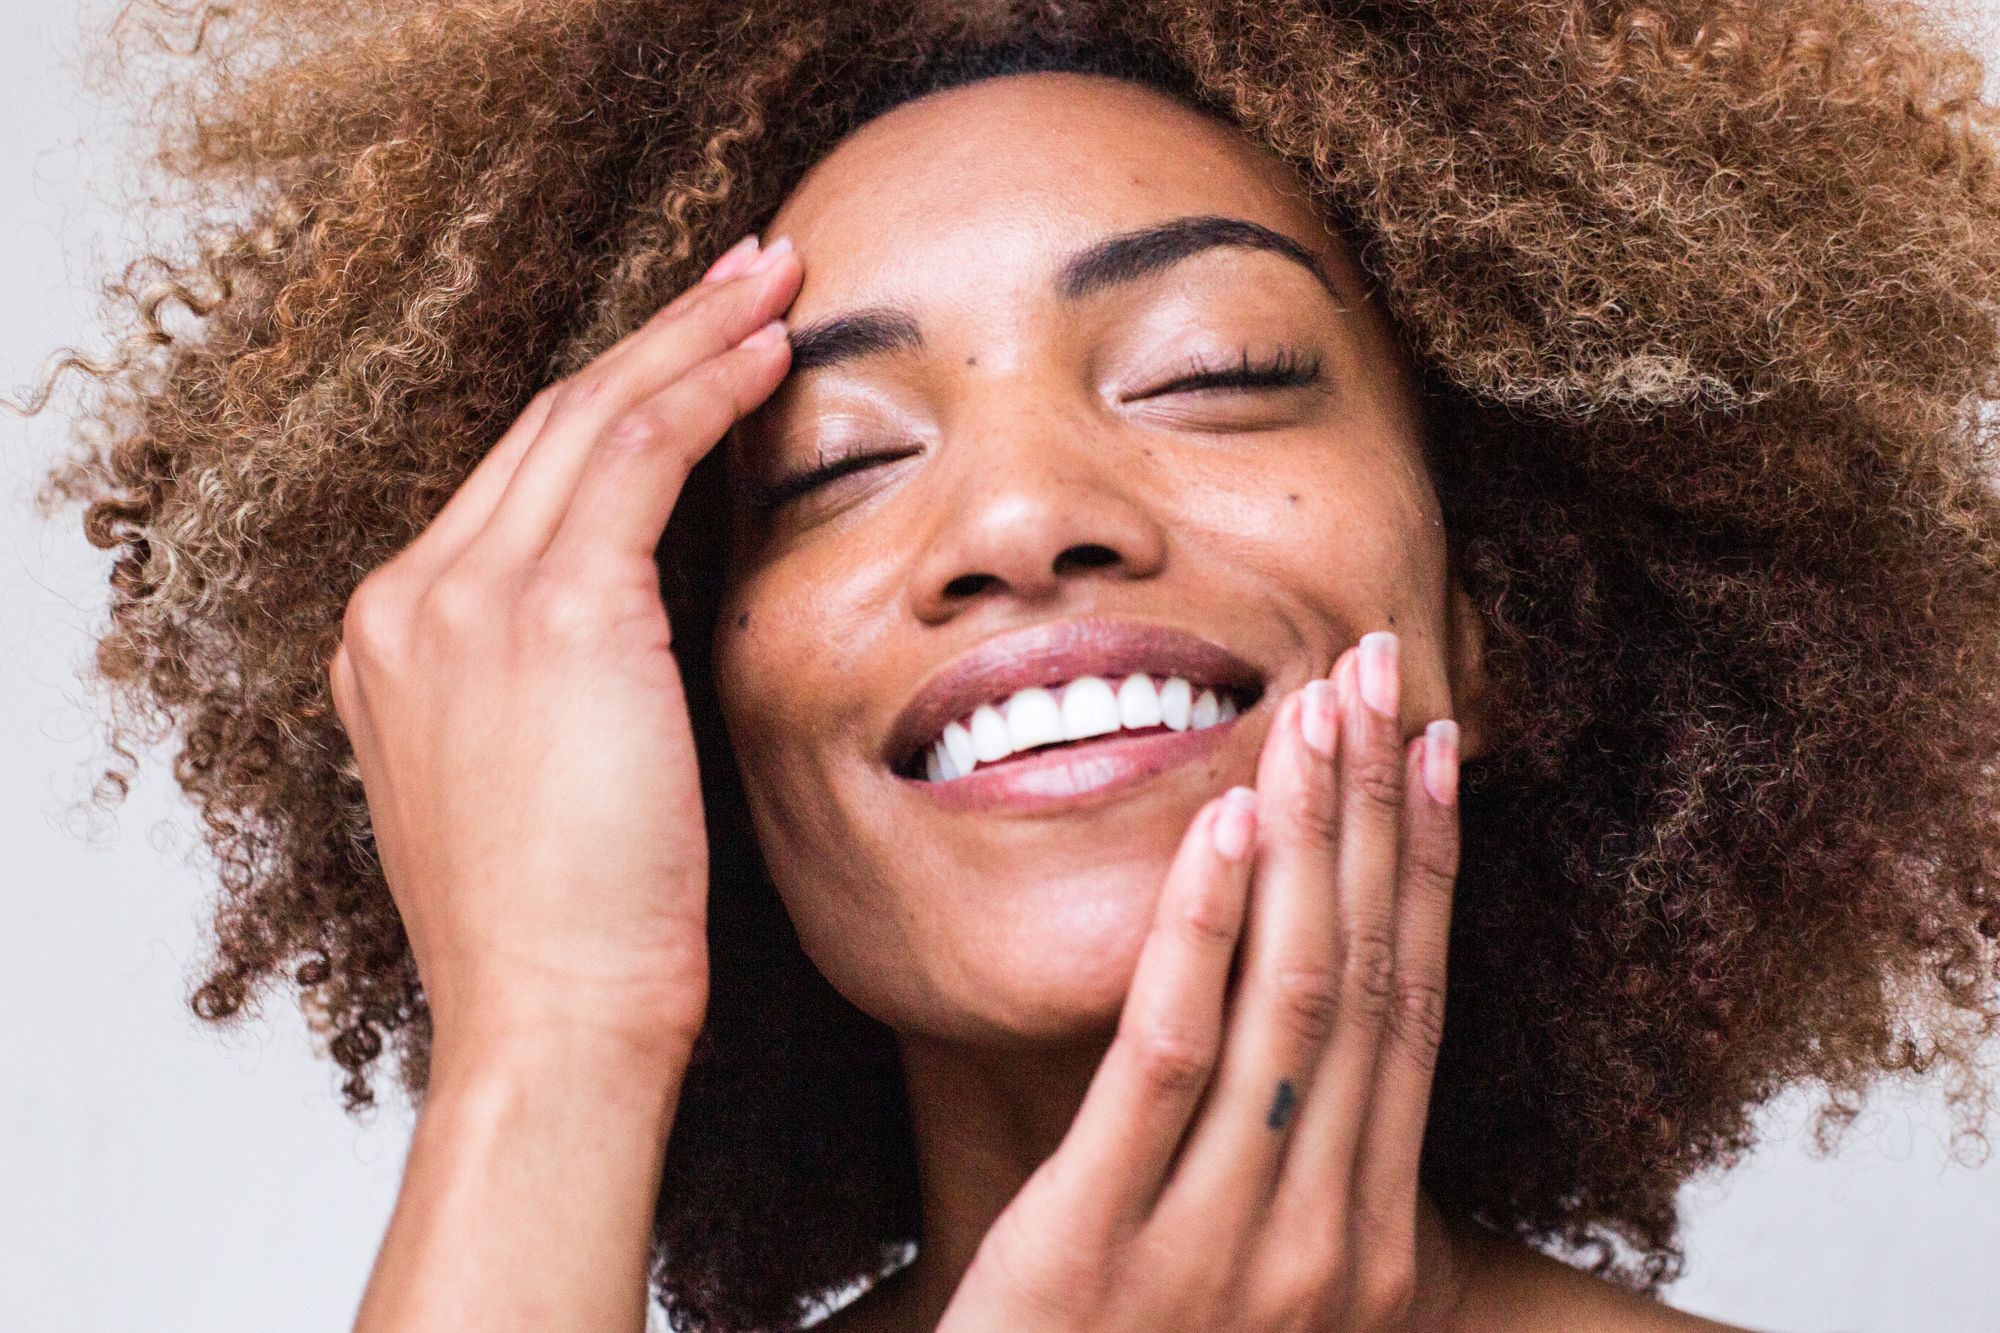 17 Easy Skincare Resolutions for 2021